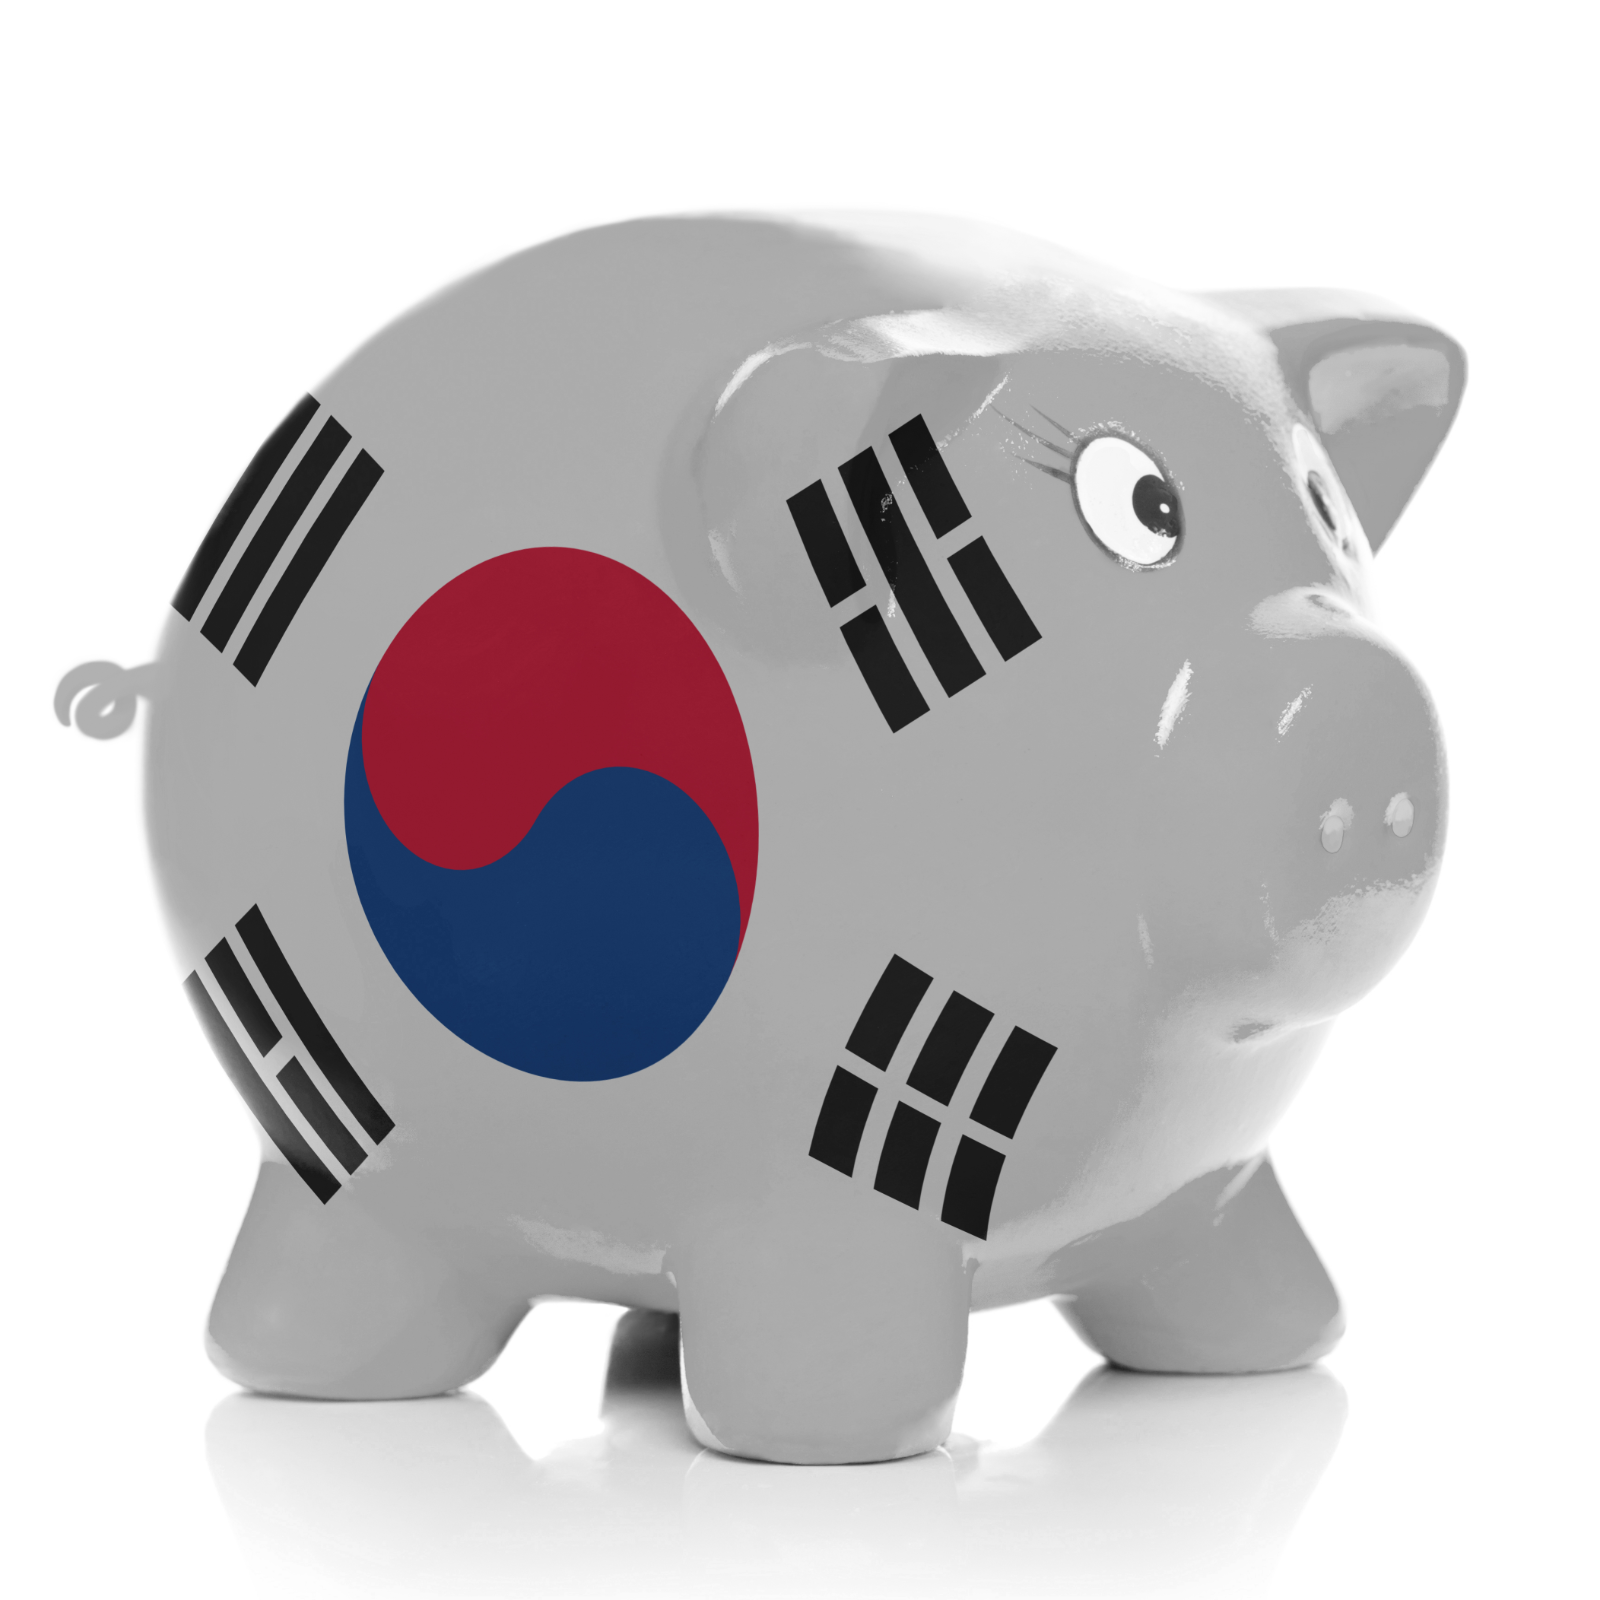 Korean Banks to Limit Services for Crypto Traders Without Real-Name Verification